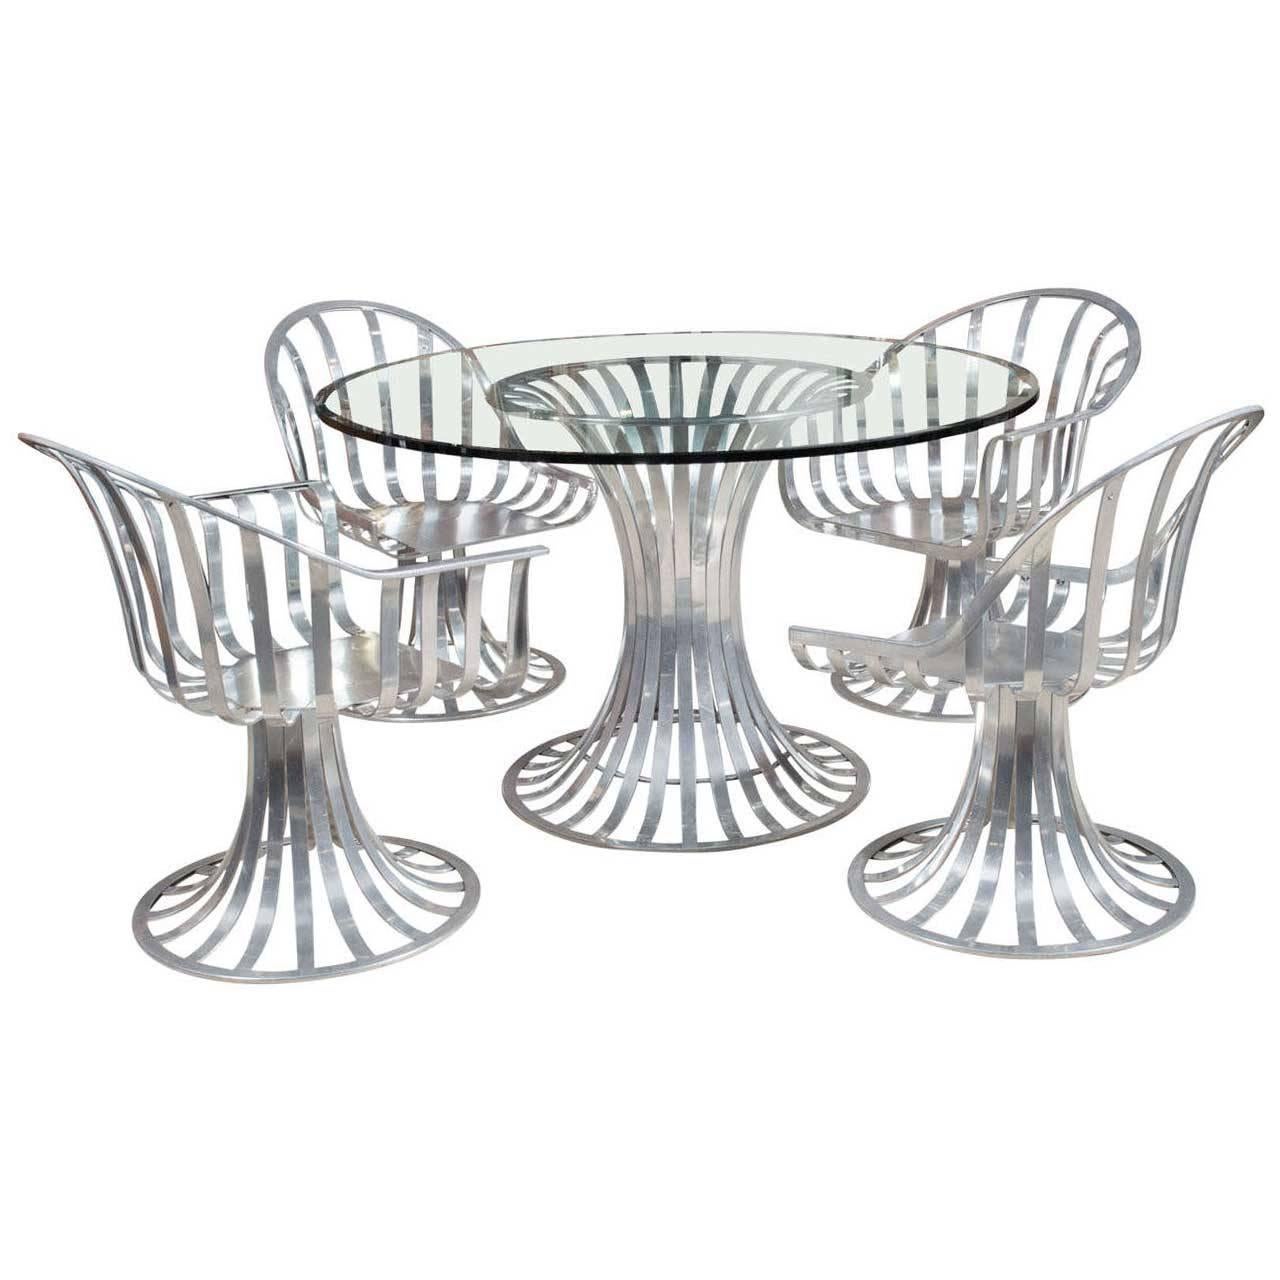 Outdoor/Patio Russell Woodard Polished Aluminum Dining Table, Chairs Set